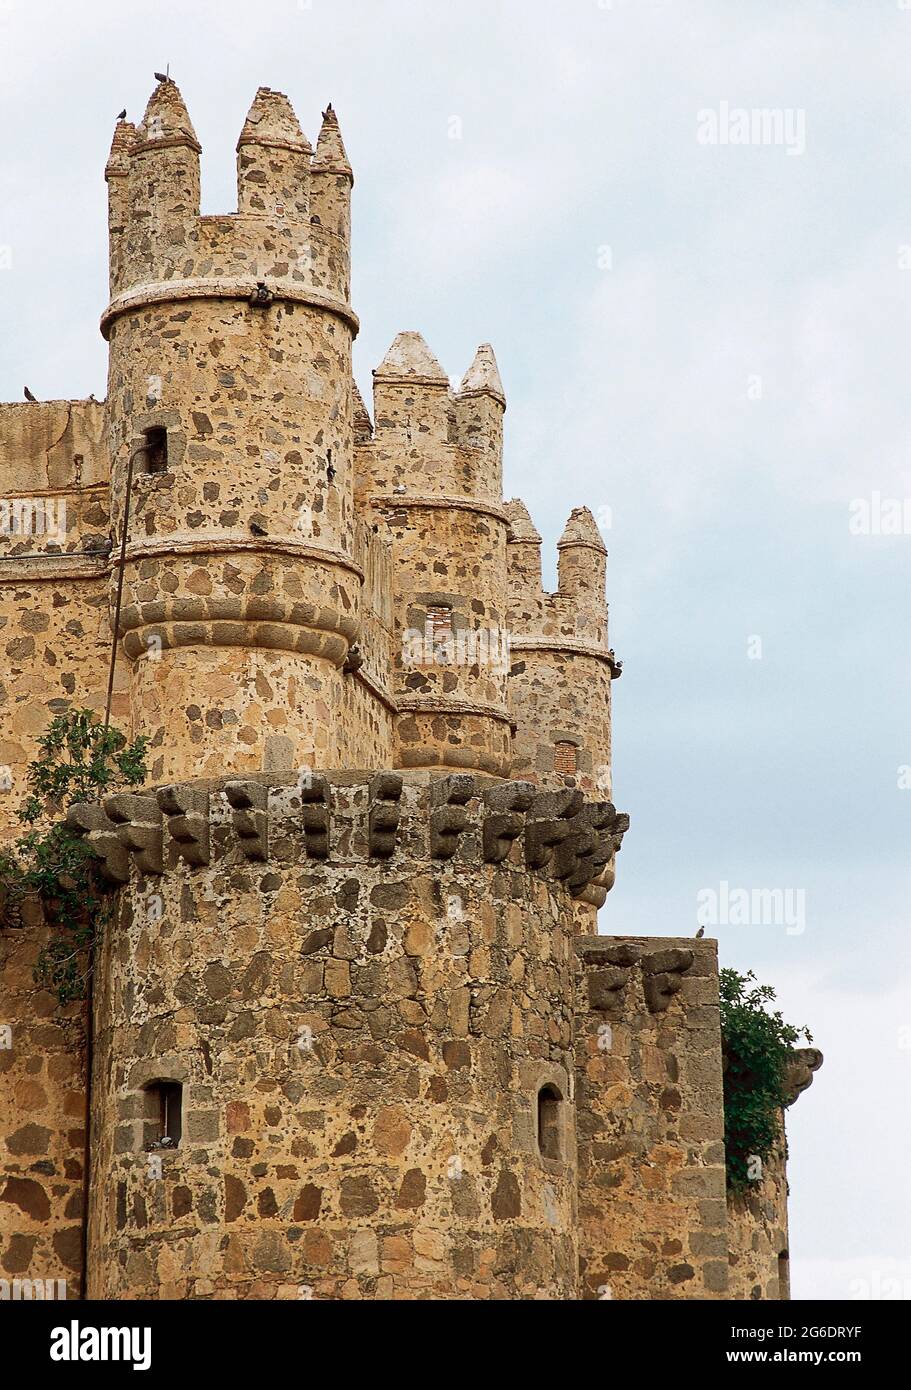 Spain, Castile-La Mancha, Toledo province. Guadamur Castle. Partial view of the fortress, built in the 15th century commissioned by Pedro López de Ayala, the first Count of Fuensalida. Stock Photo